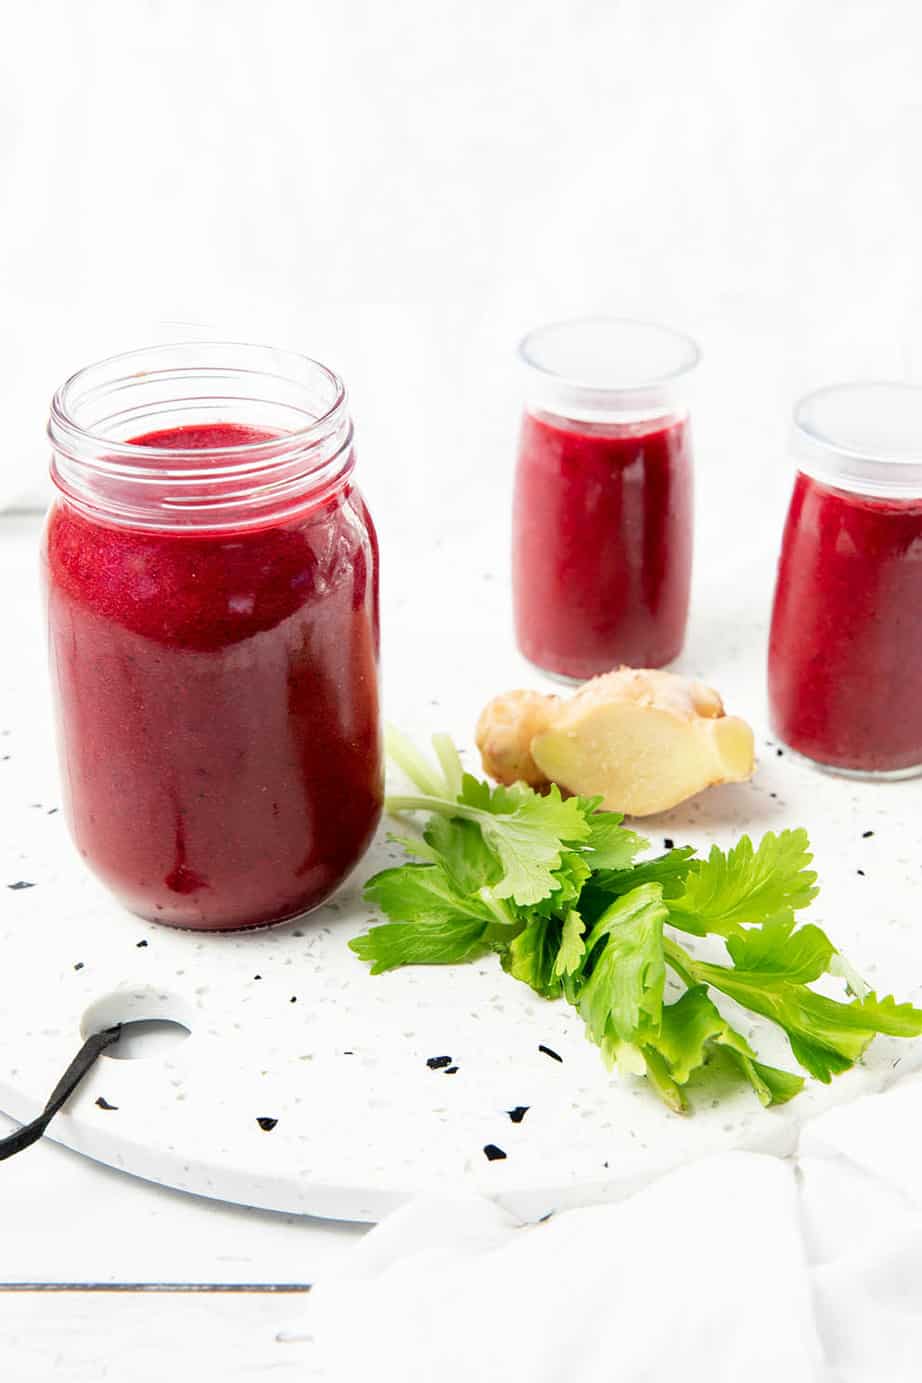 Berry Beetroot smoothie on a stone bench with ingredients like celery and ginger next to the smoothie